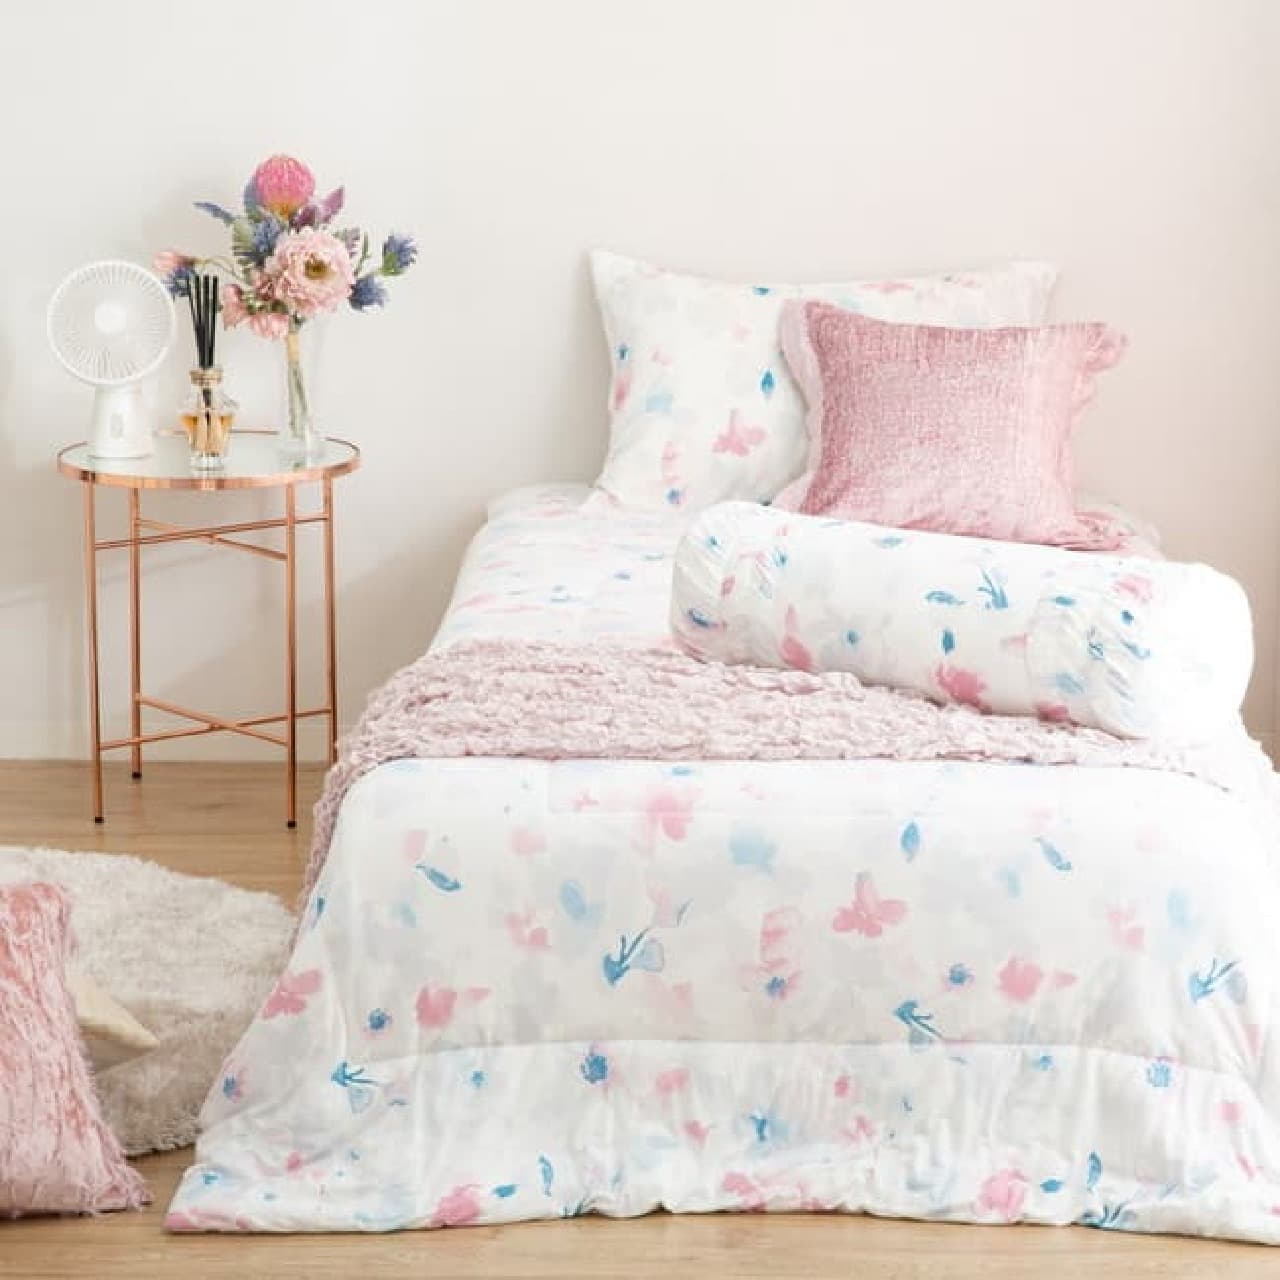 Francfranc's cool-to-the-touch bedding "Fuwaro" series -- Supporting your sleep in spring and summer! Pillow covers, comforters, bed pads, sleeping mats, etc.